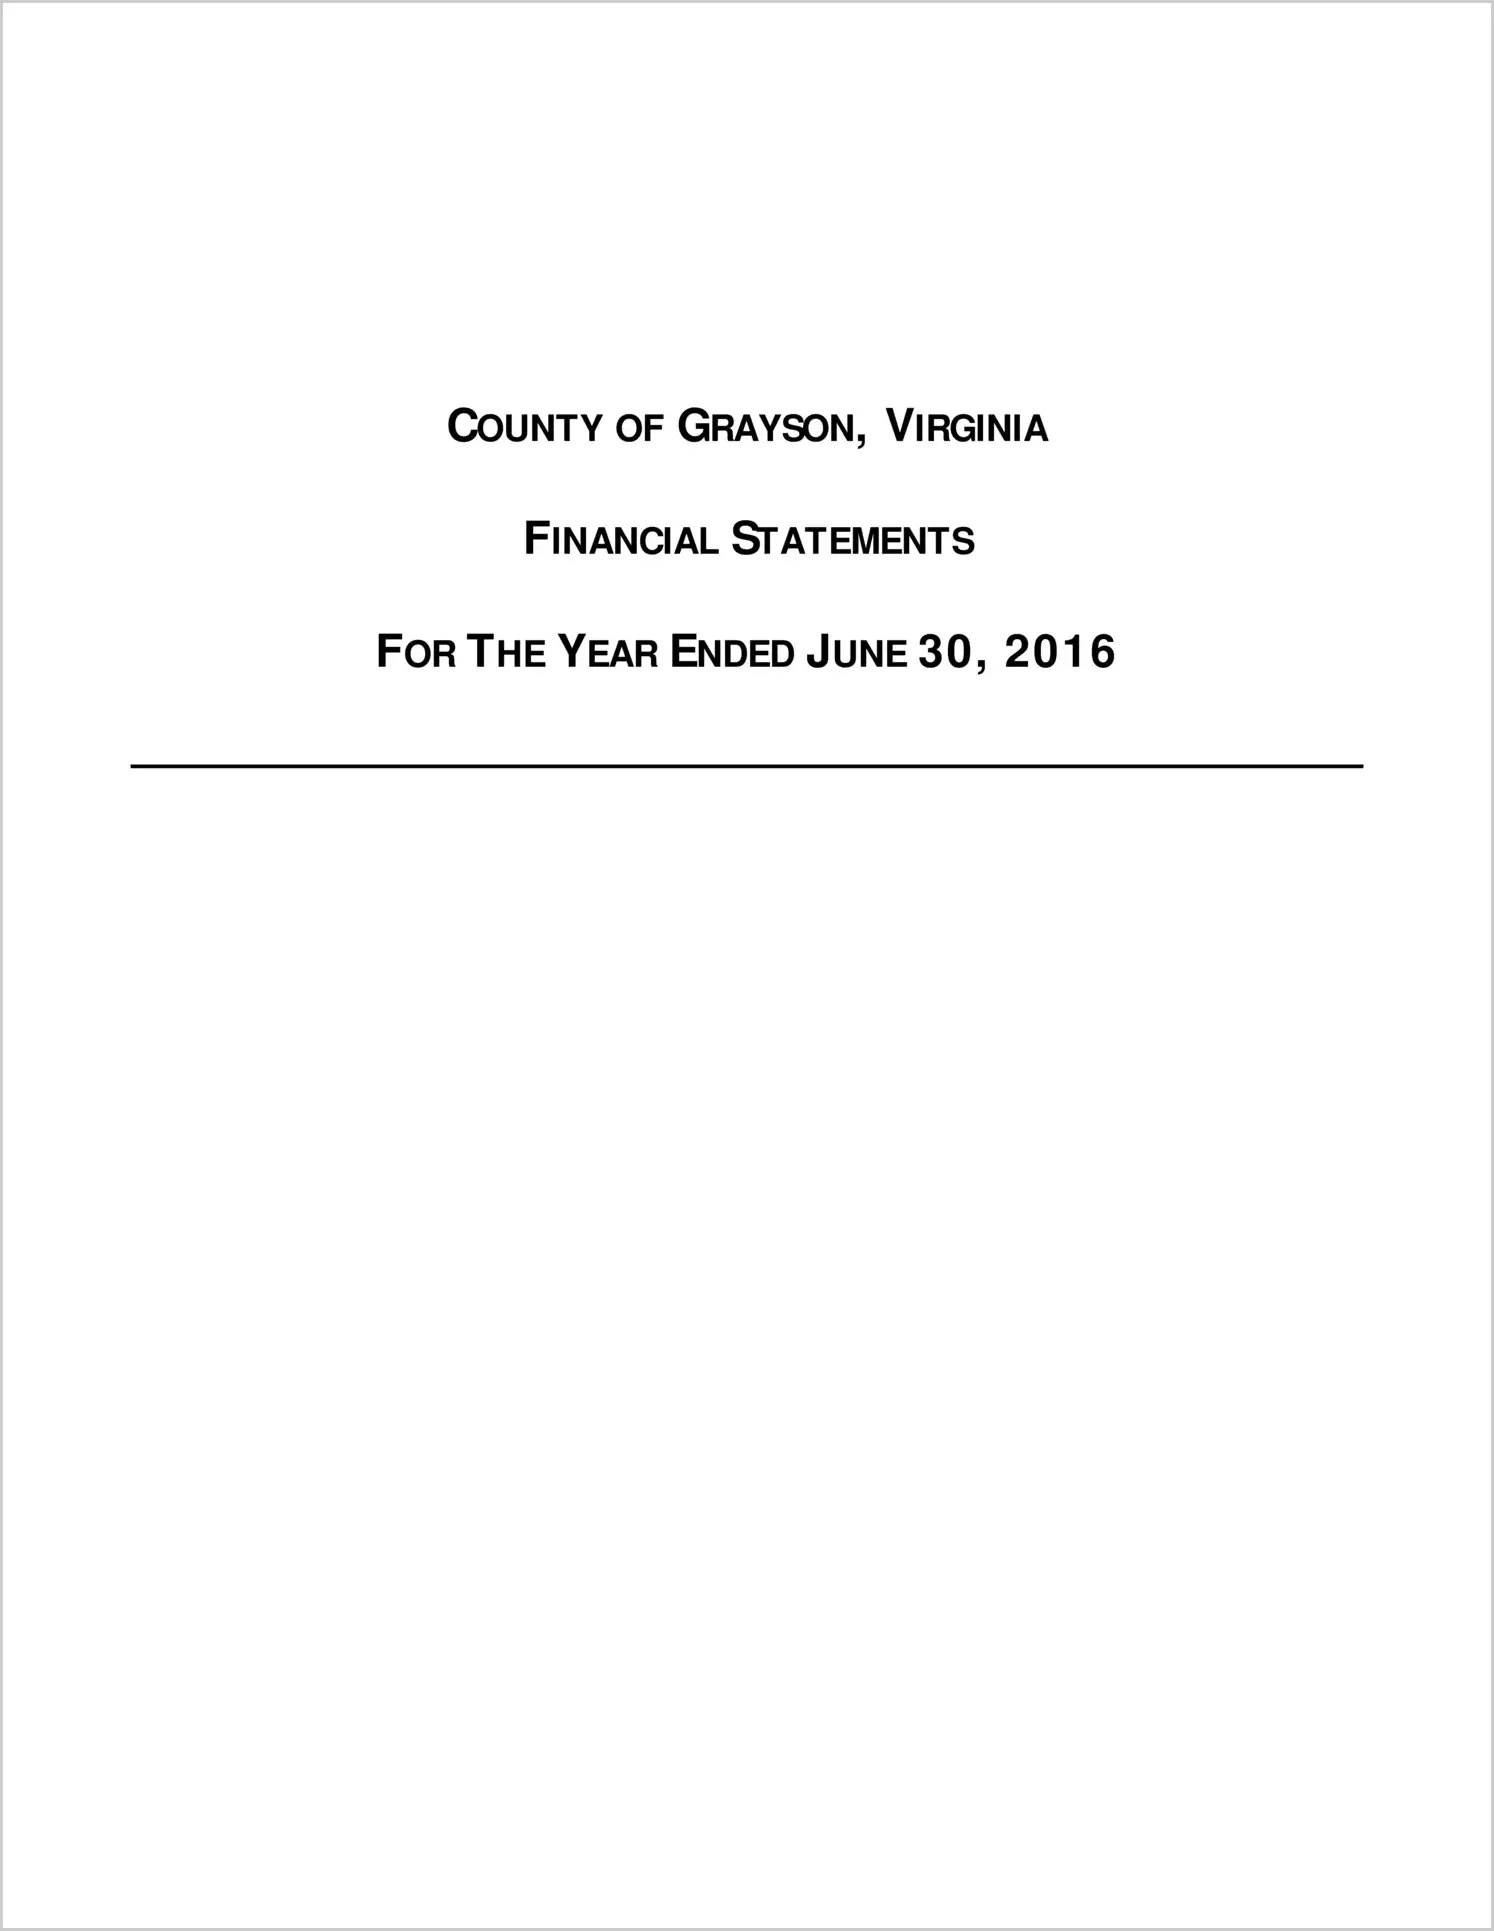 2016 Annual Financial Report for County of Grayson